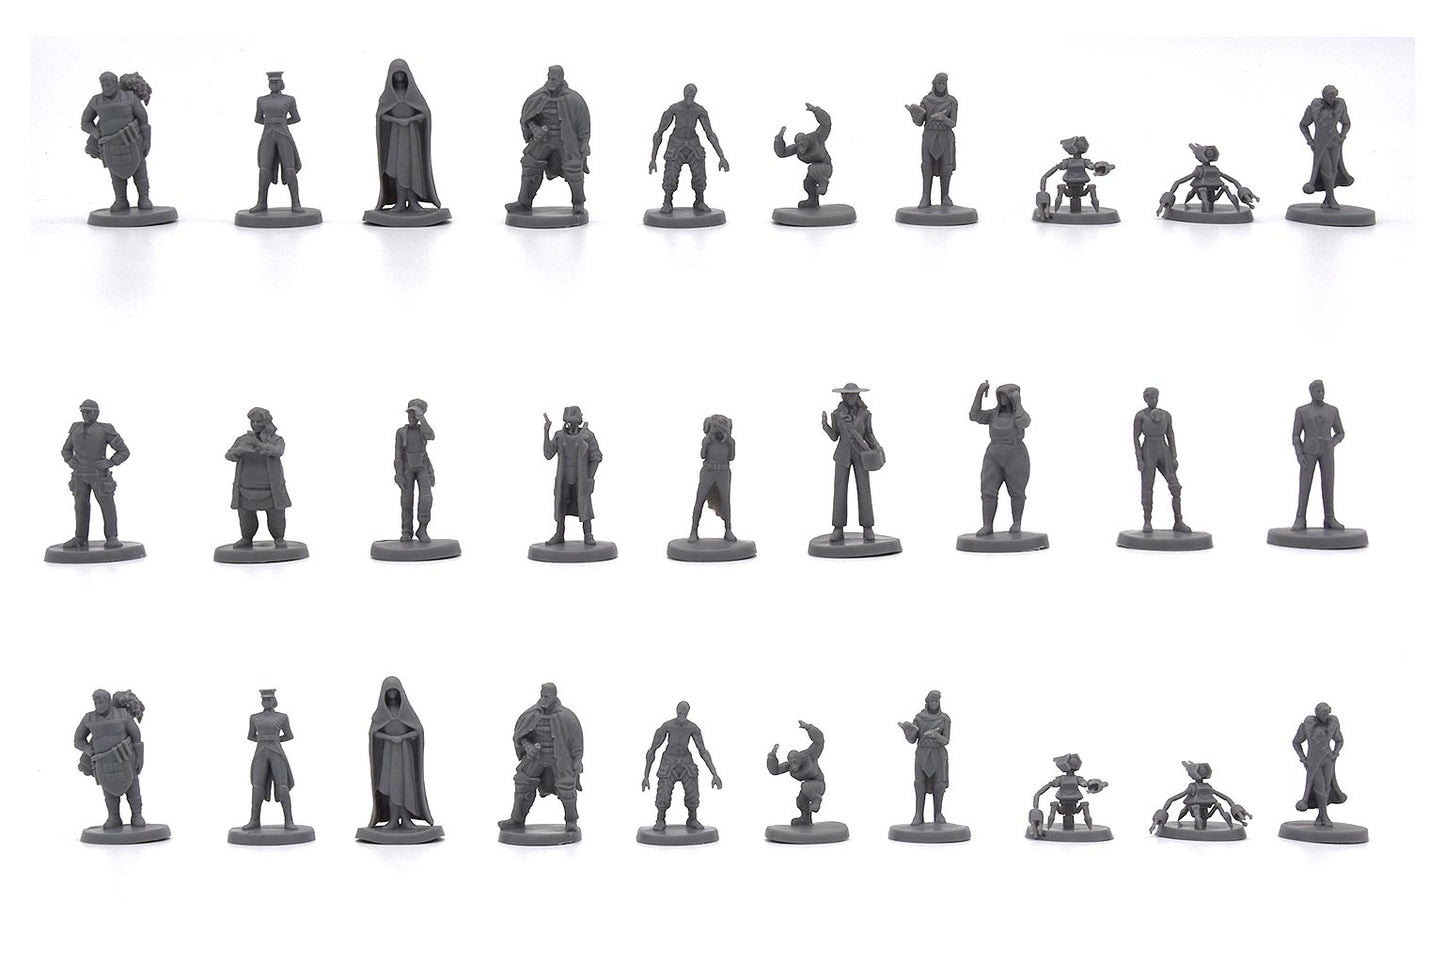 Stationfall 3D Minis